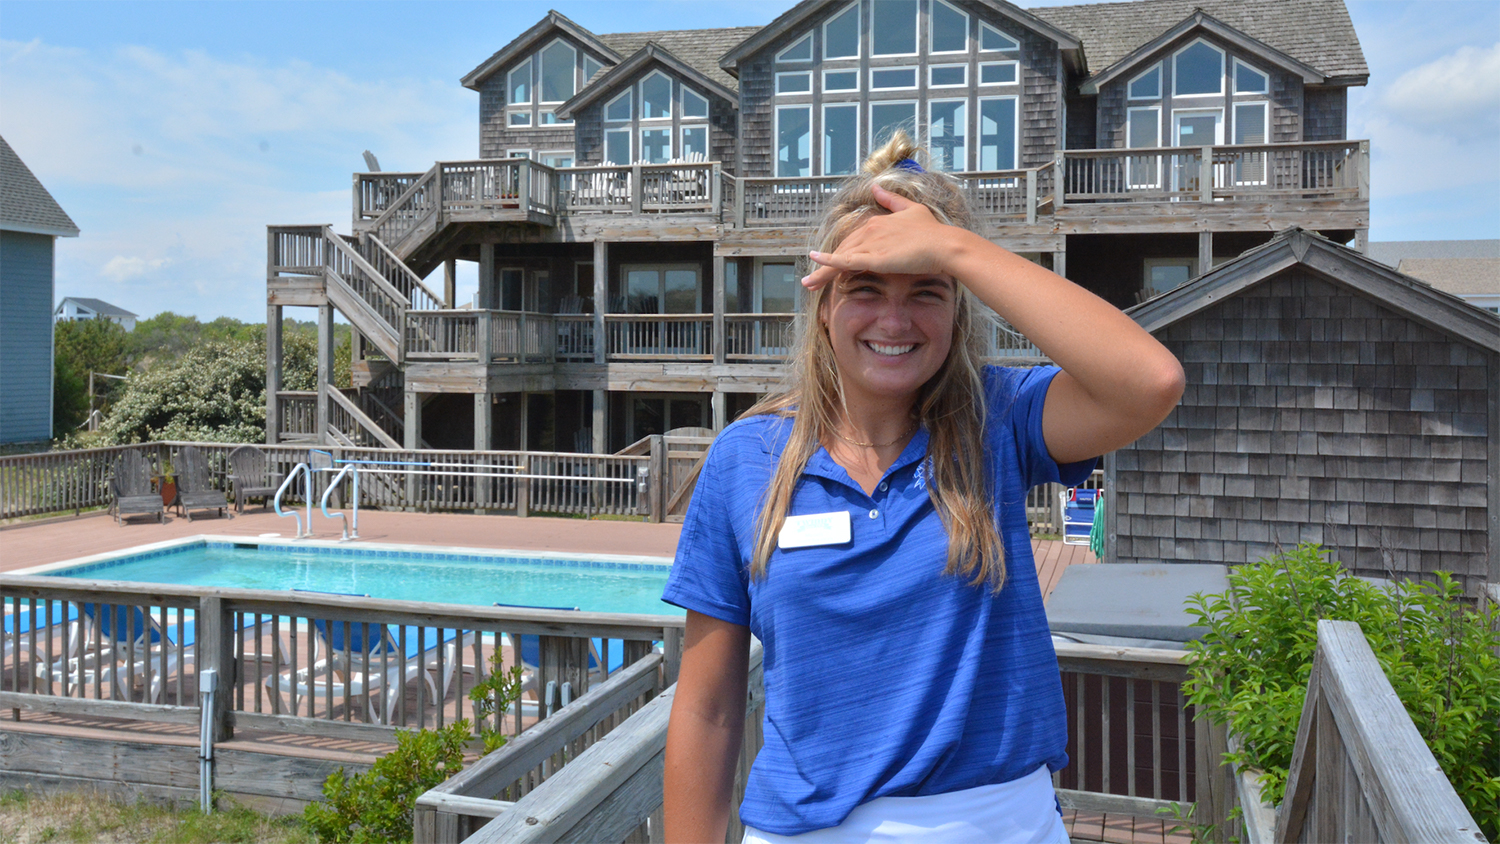 NC State student Micaela Nardino poses for a photo in front of the Twiddy and Company headquarters in Corolla, North Carolina - Twiddy & Company Intern Micaela Nardino Promotes Outer Banks Tourism - College of Natural Resources News NC State University